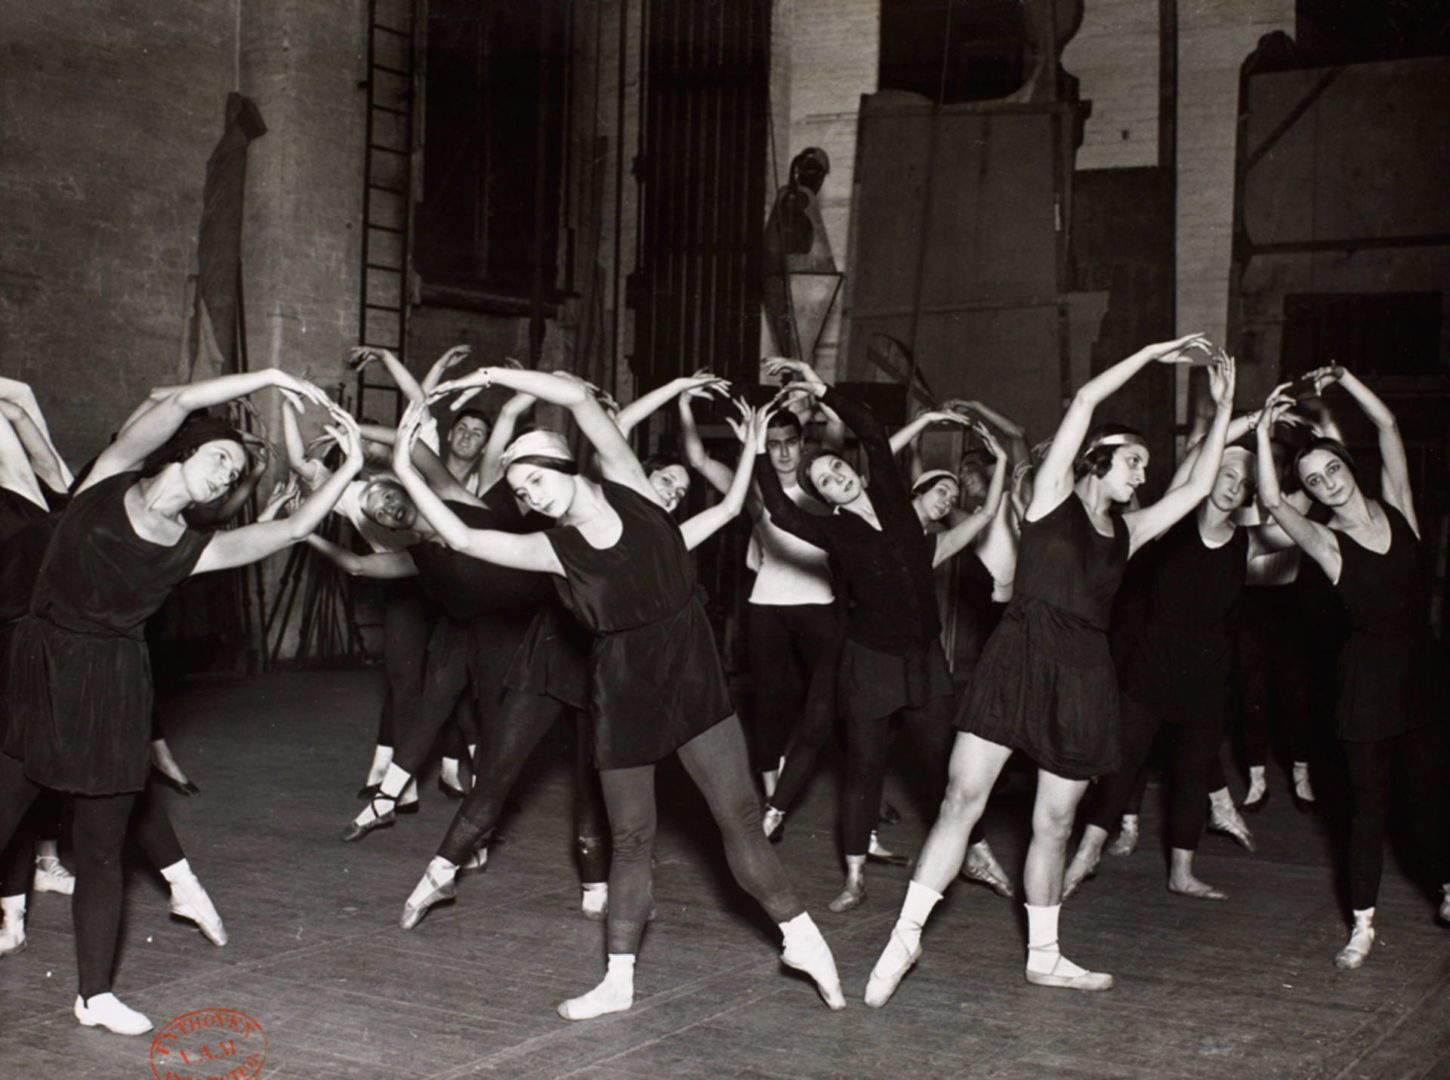 Dancers in the 1920s